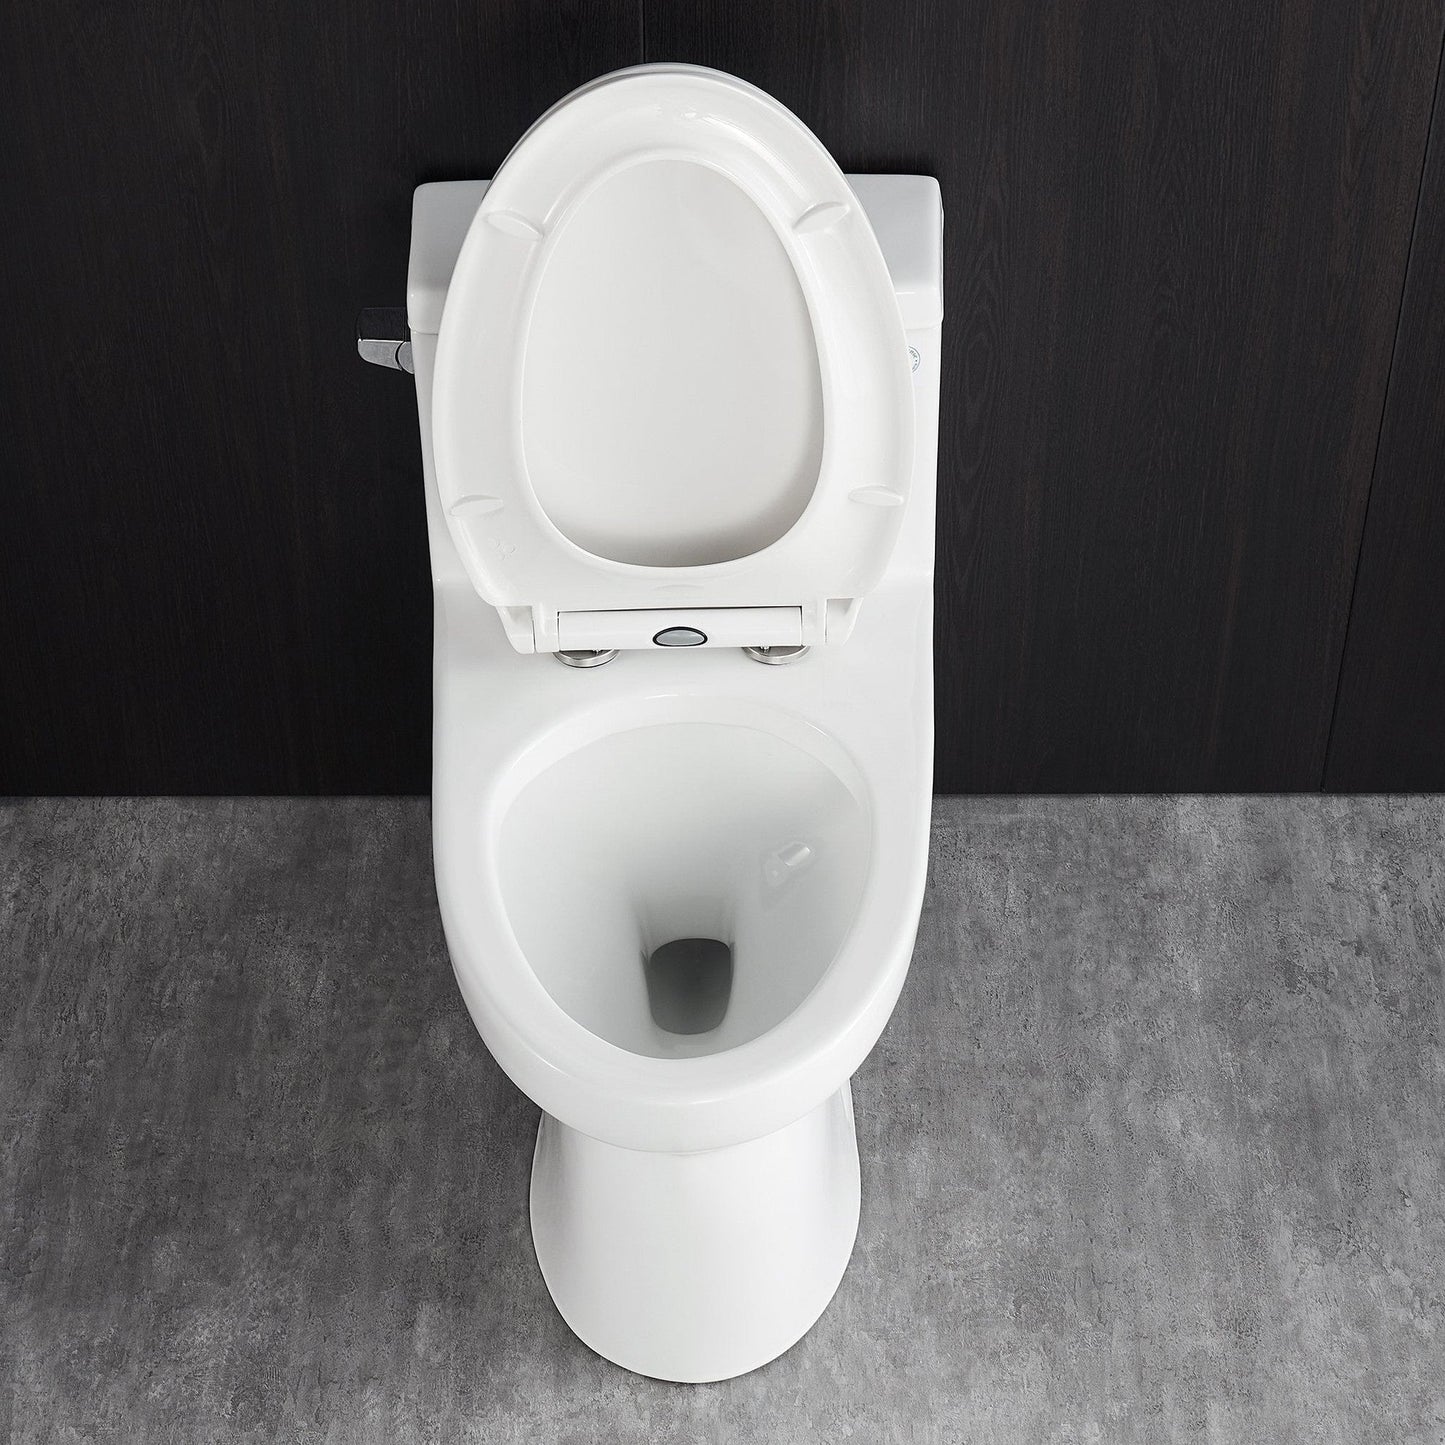 DeerValley Concord 12" Rough-in Single-Flush Elongated White One-Piece Toilet With Soft Closing Seat